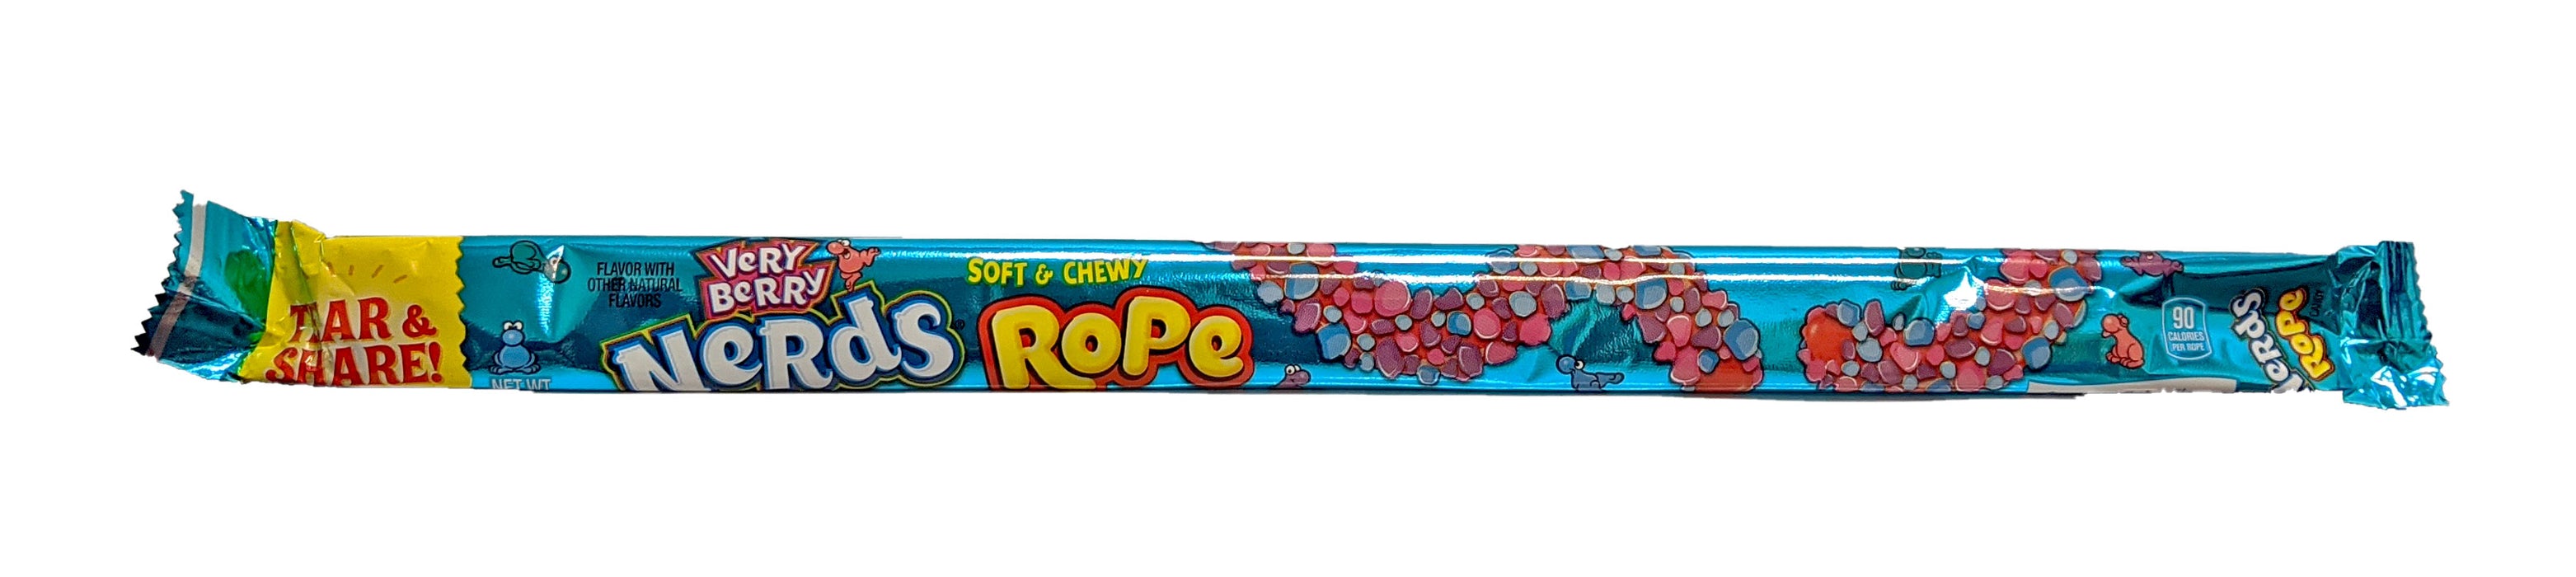 Nerds Rope Very Berry .92oz Rope or 24 Count Box